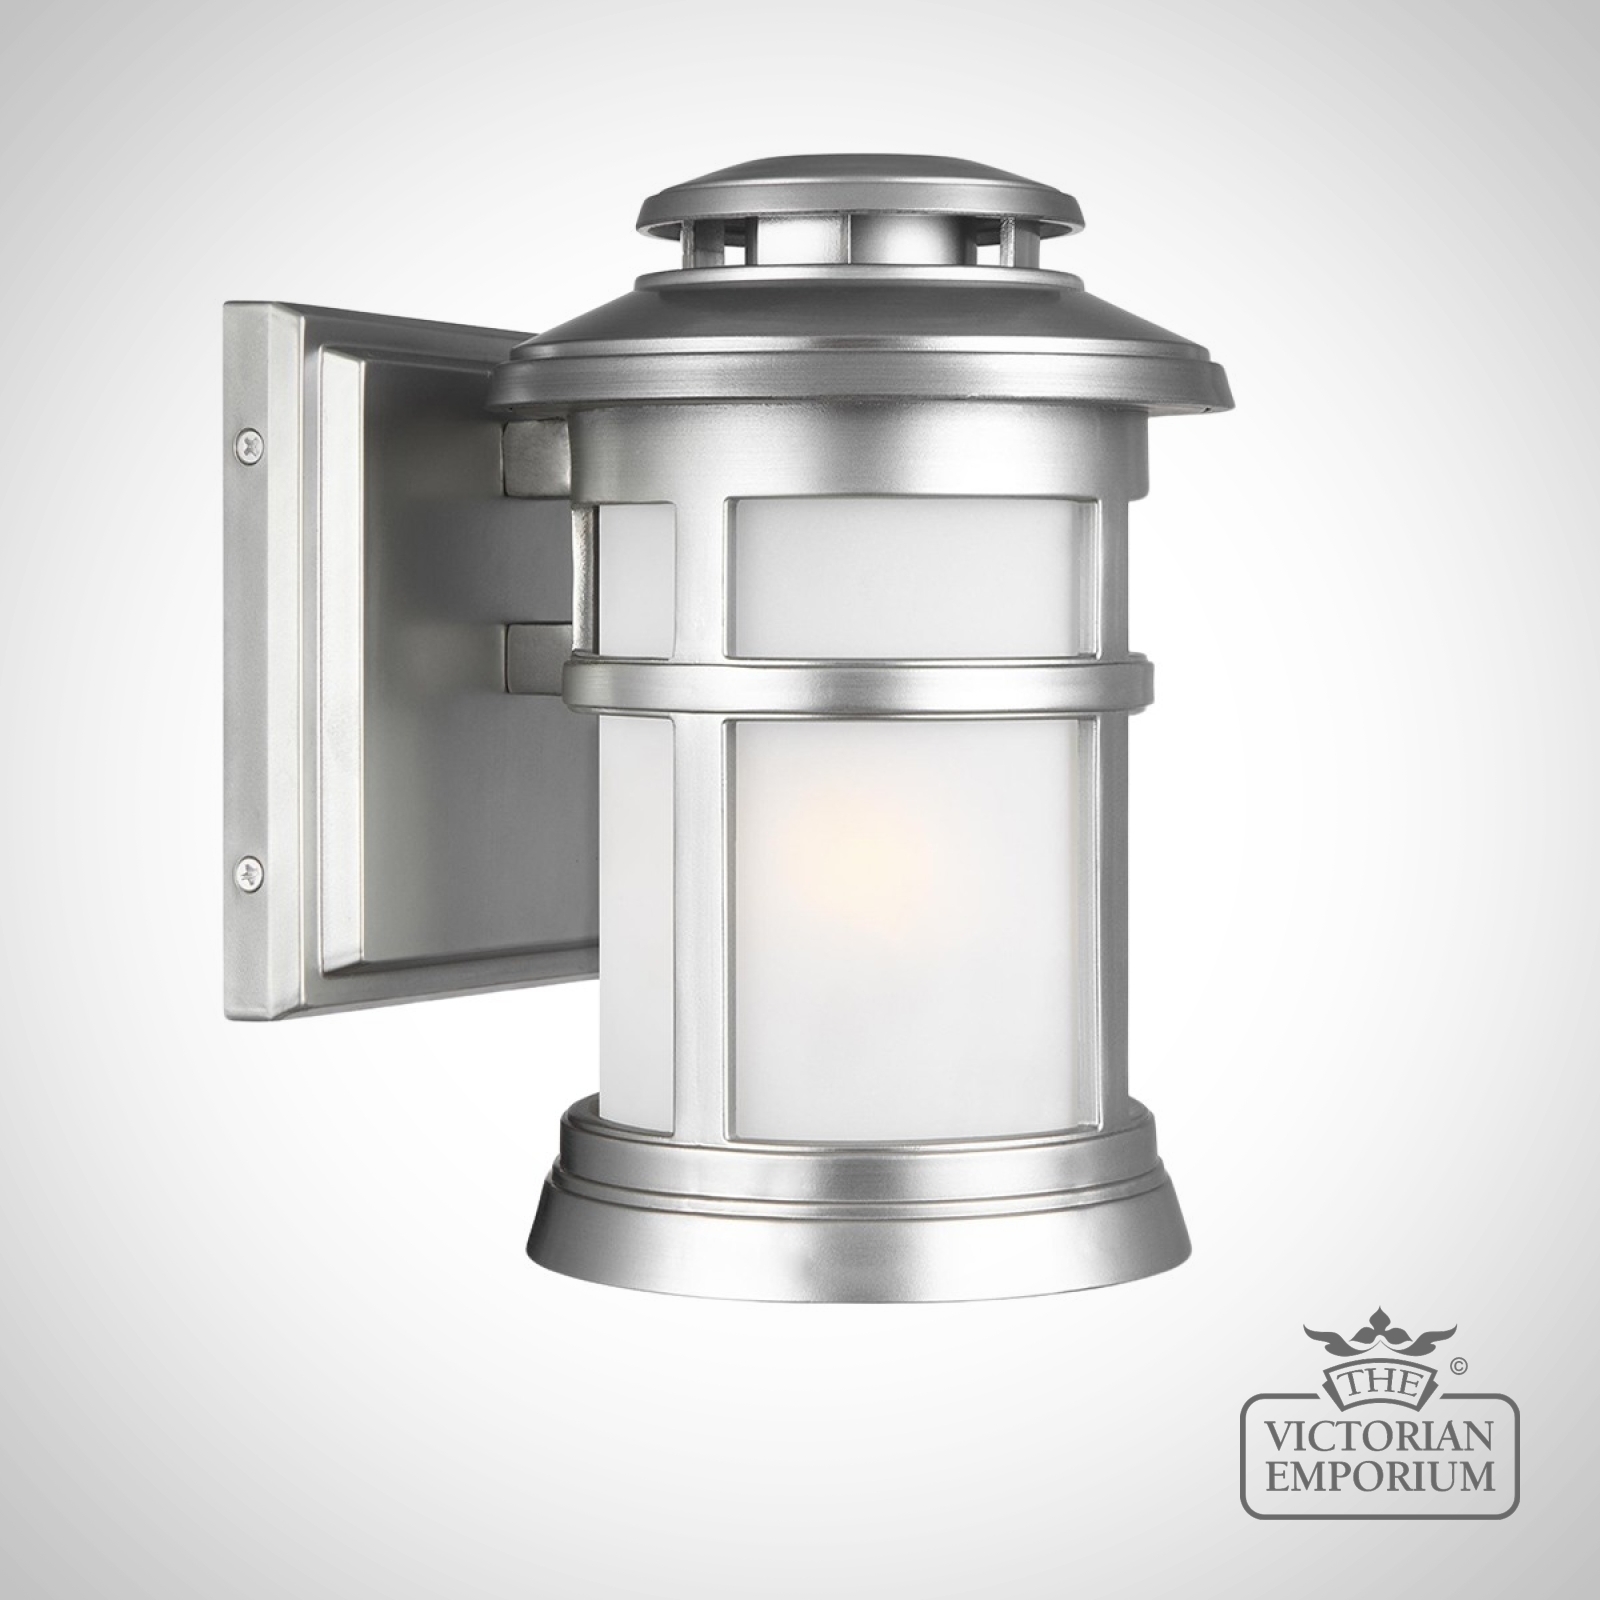 Newport small exterior wall light in Painted Brushed Steel